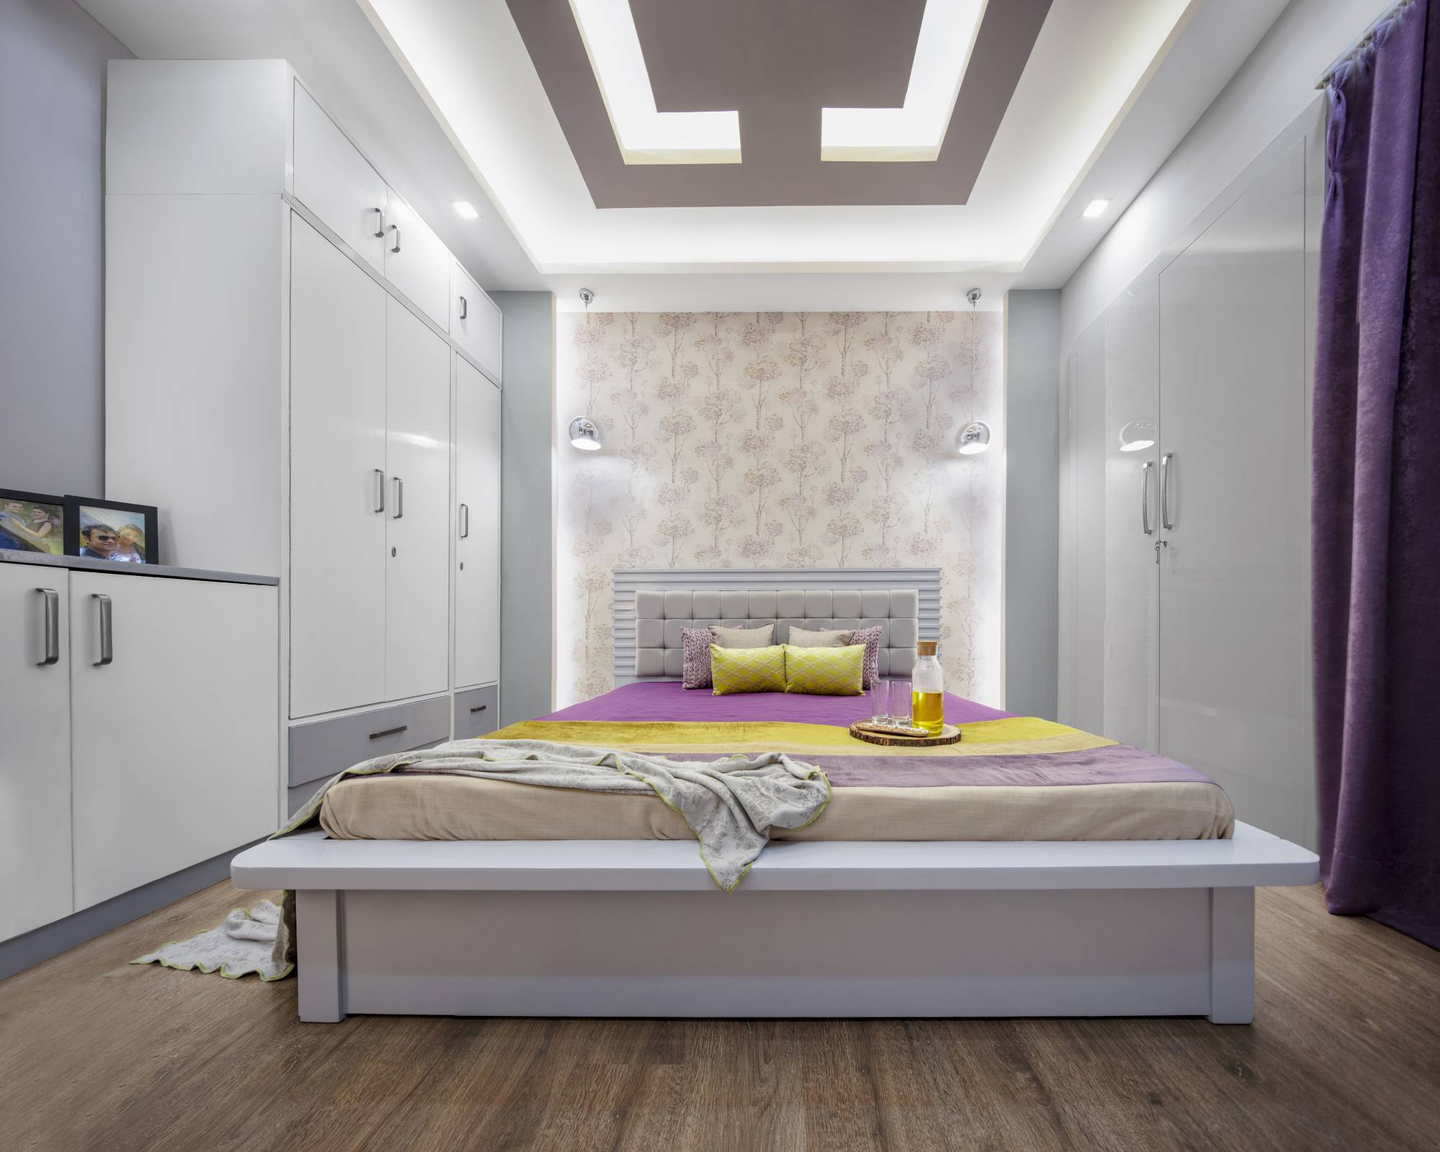 Guest Room With False Ceiling - Livspace